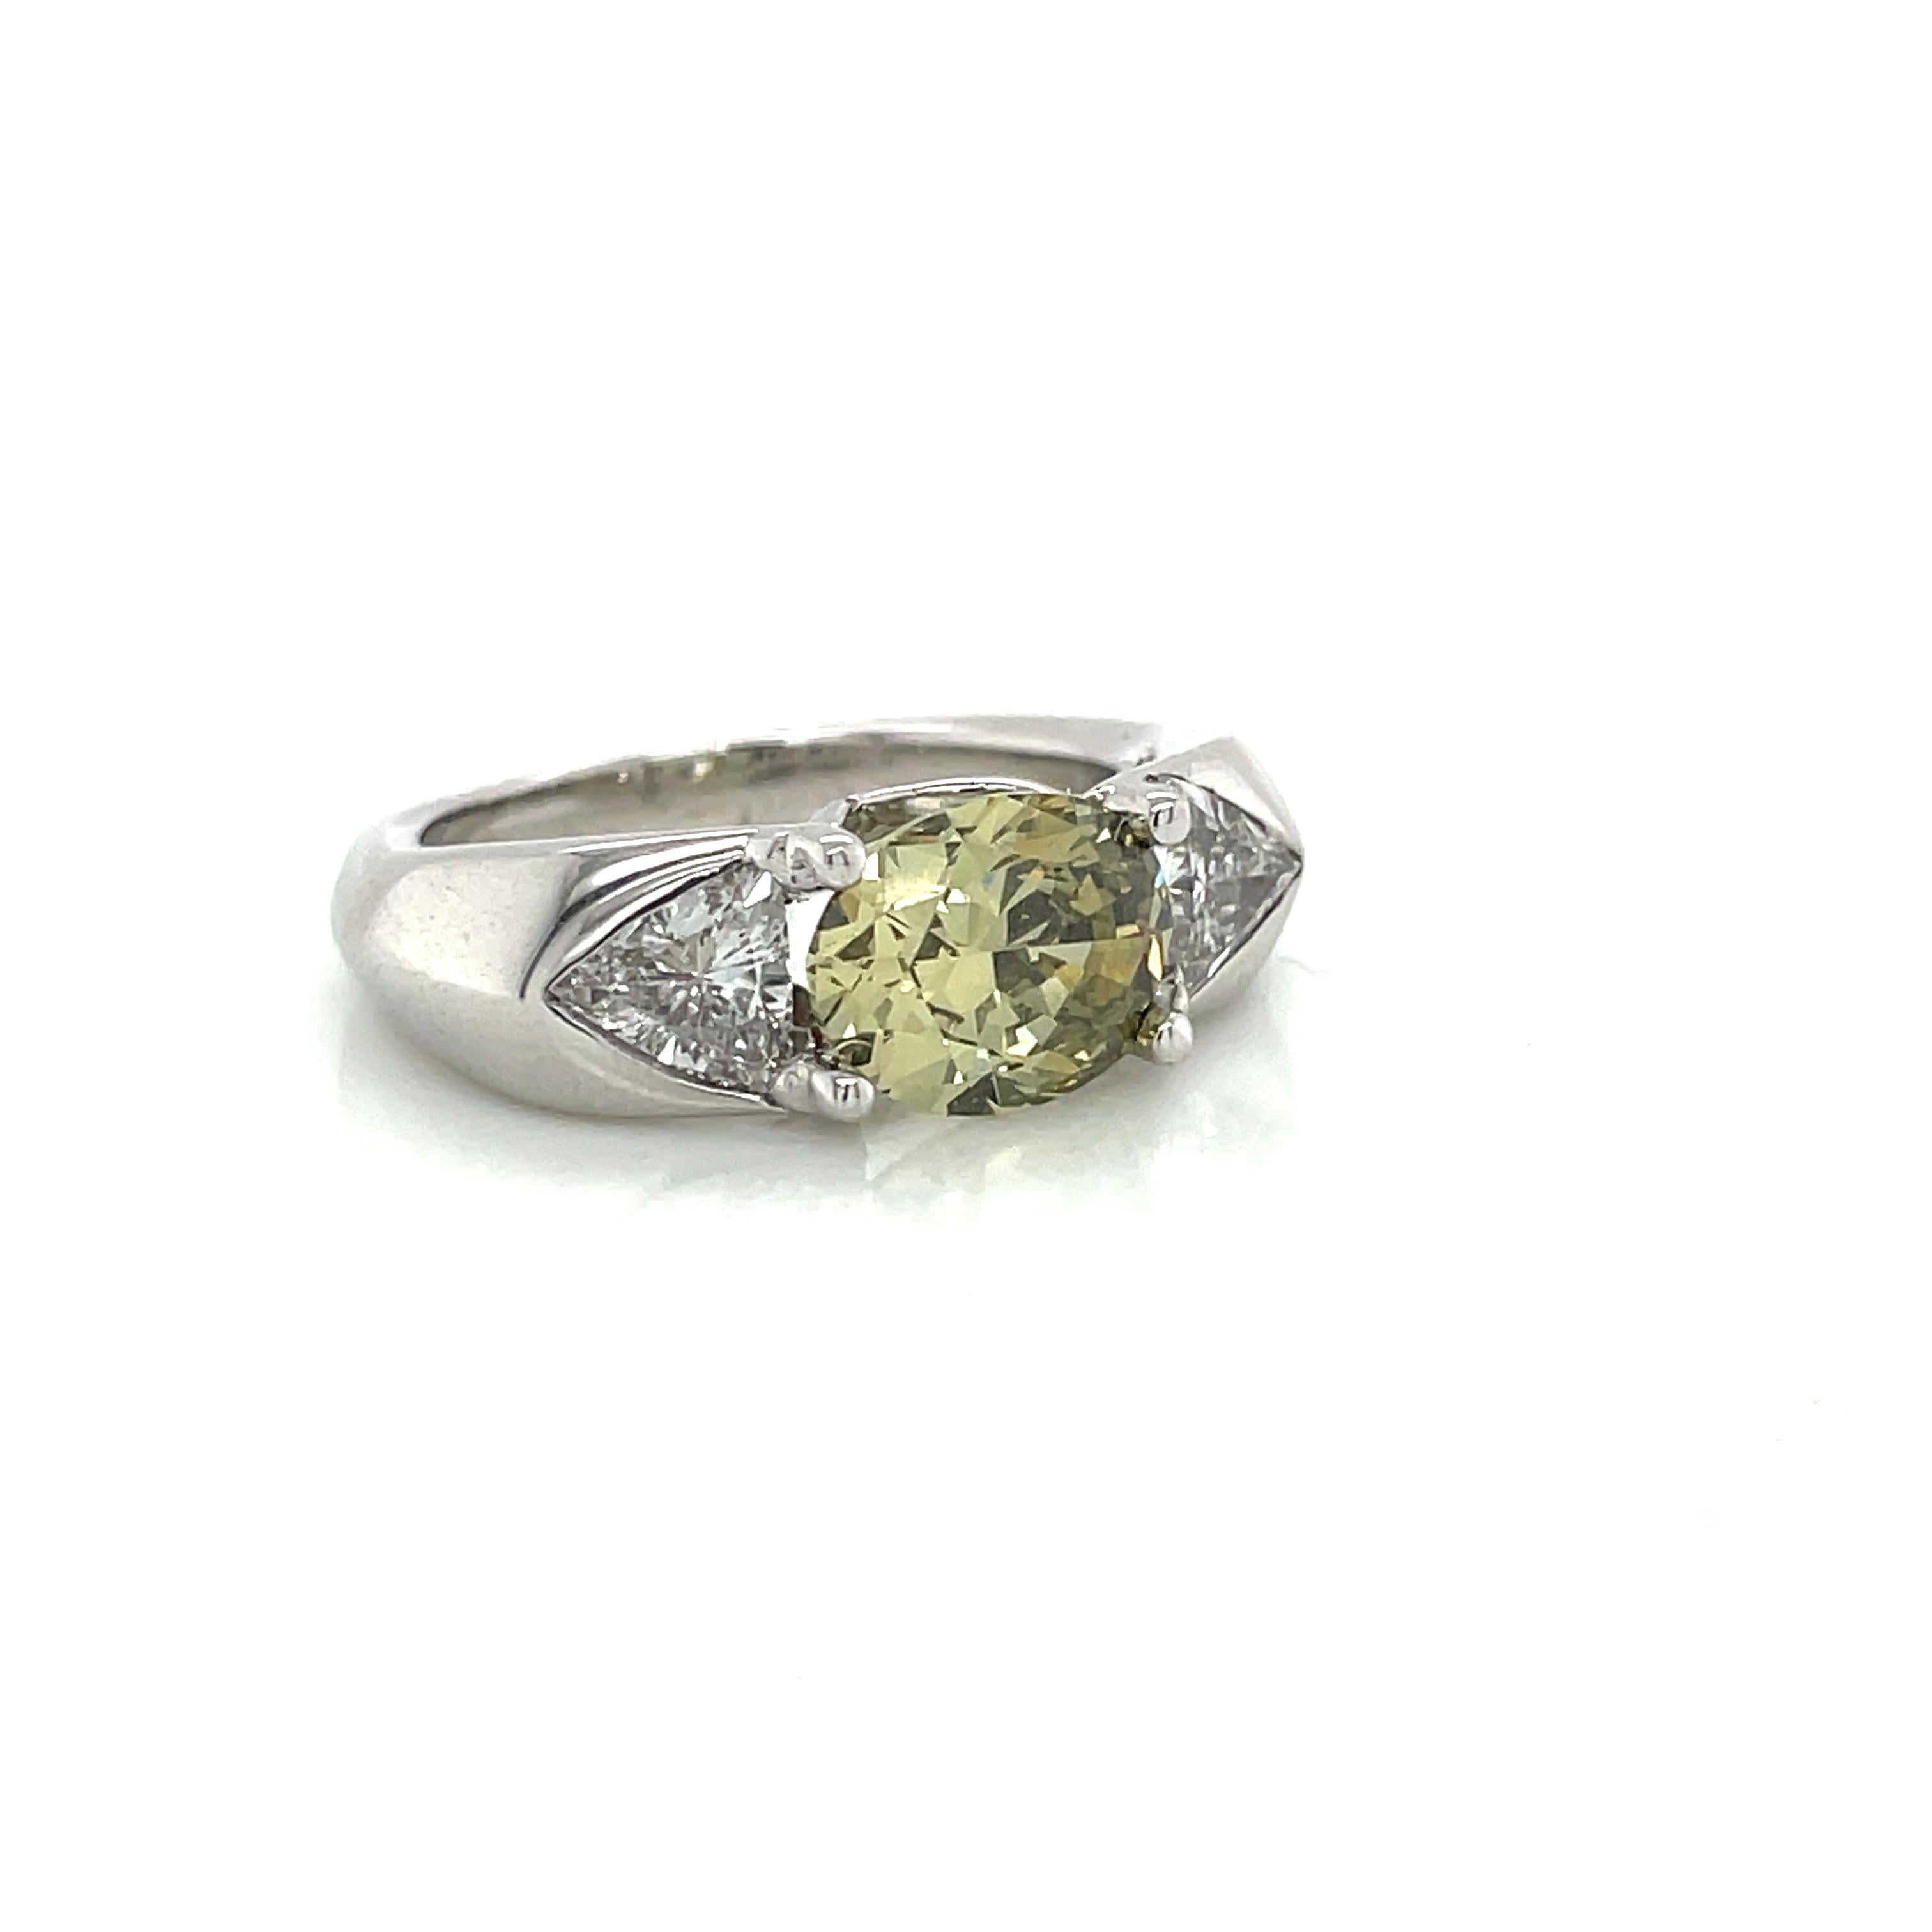 We love a chunky setting and this super cool piece does not disappoint. A 1.80 carat fancy color oval brilliant is set east-west between two amazing icy trillions. The color is so unique - a GIA graded dark gray-greenish yellow, it's anything but